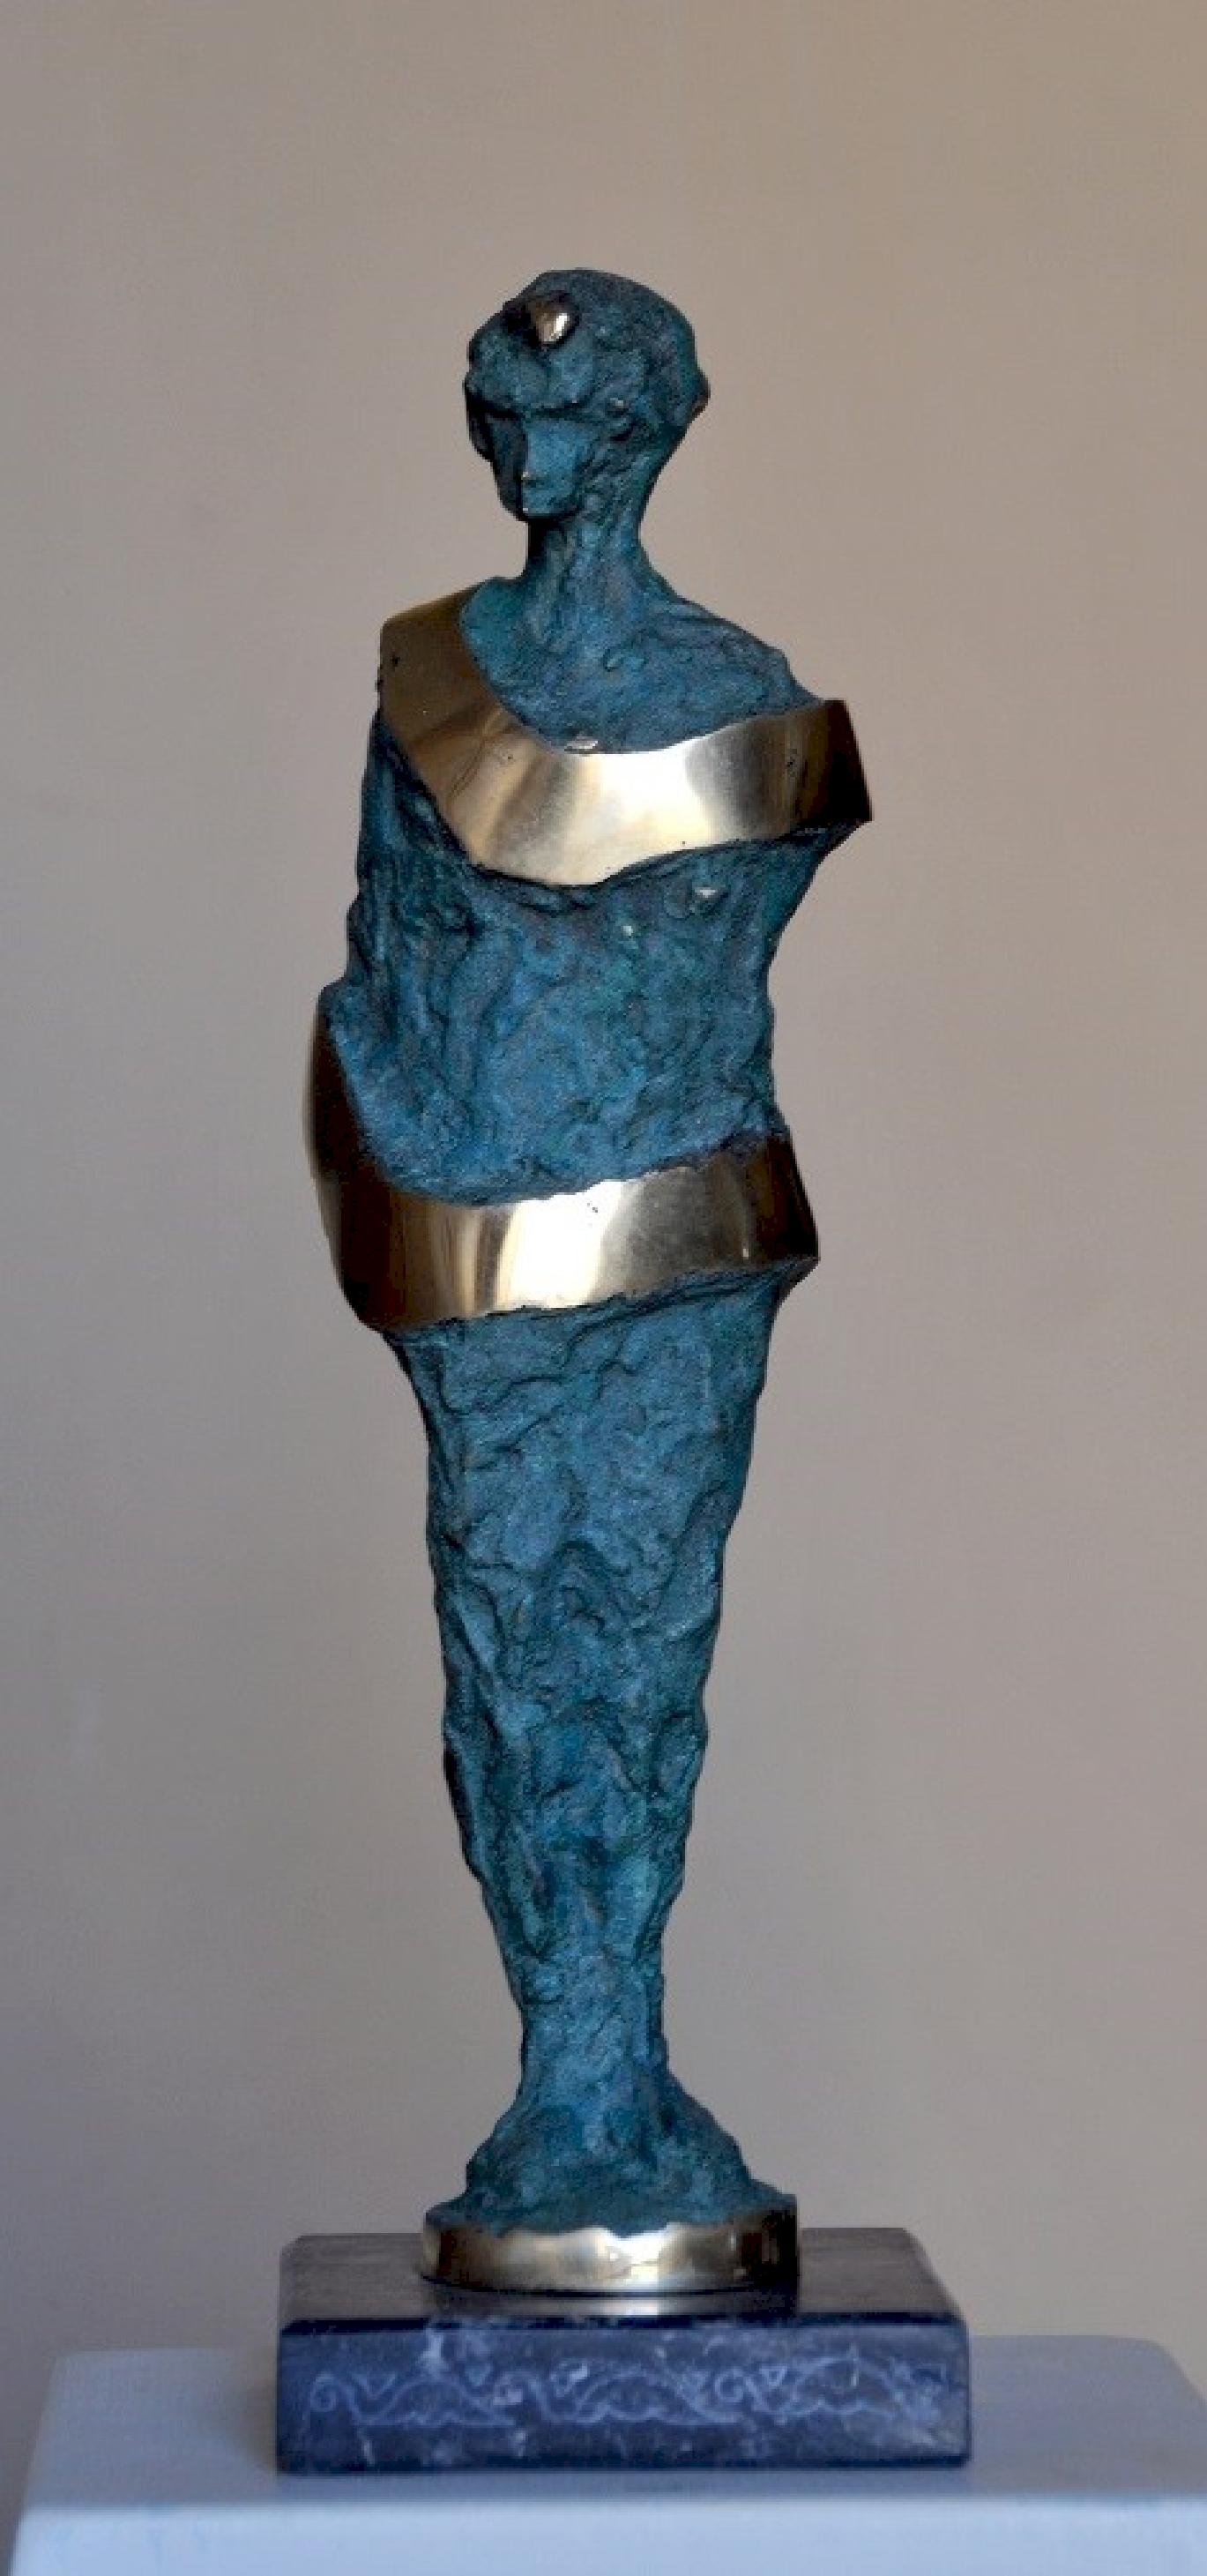 "Adorned II" Bronze Sculpture 14" x 4" x 2" inch by Sarkis Tossonian			

Sarkis Tossoonian was born in Alexandria in 1953. He graduated from the Faculty of Fine Arts/Sculpture in 1979. He started exhibiting in individual and group exhibitions in